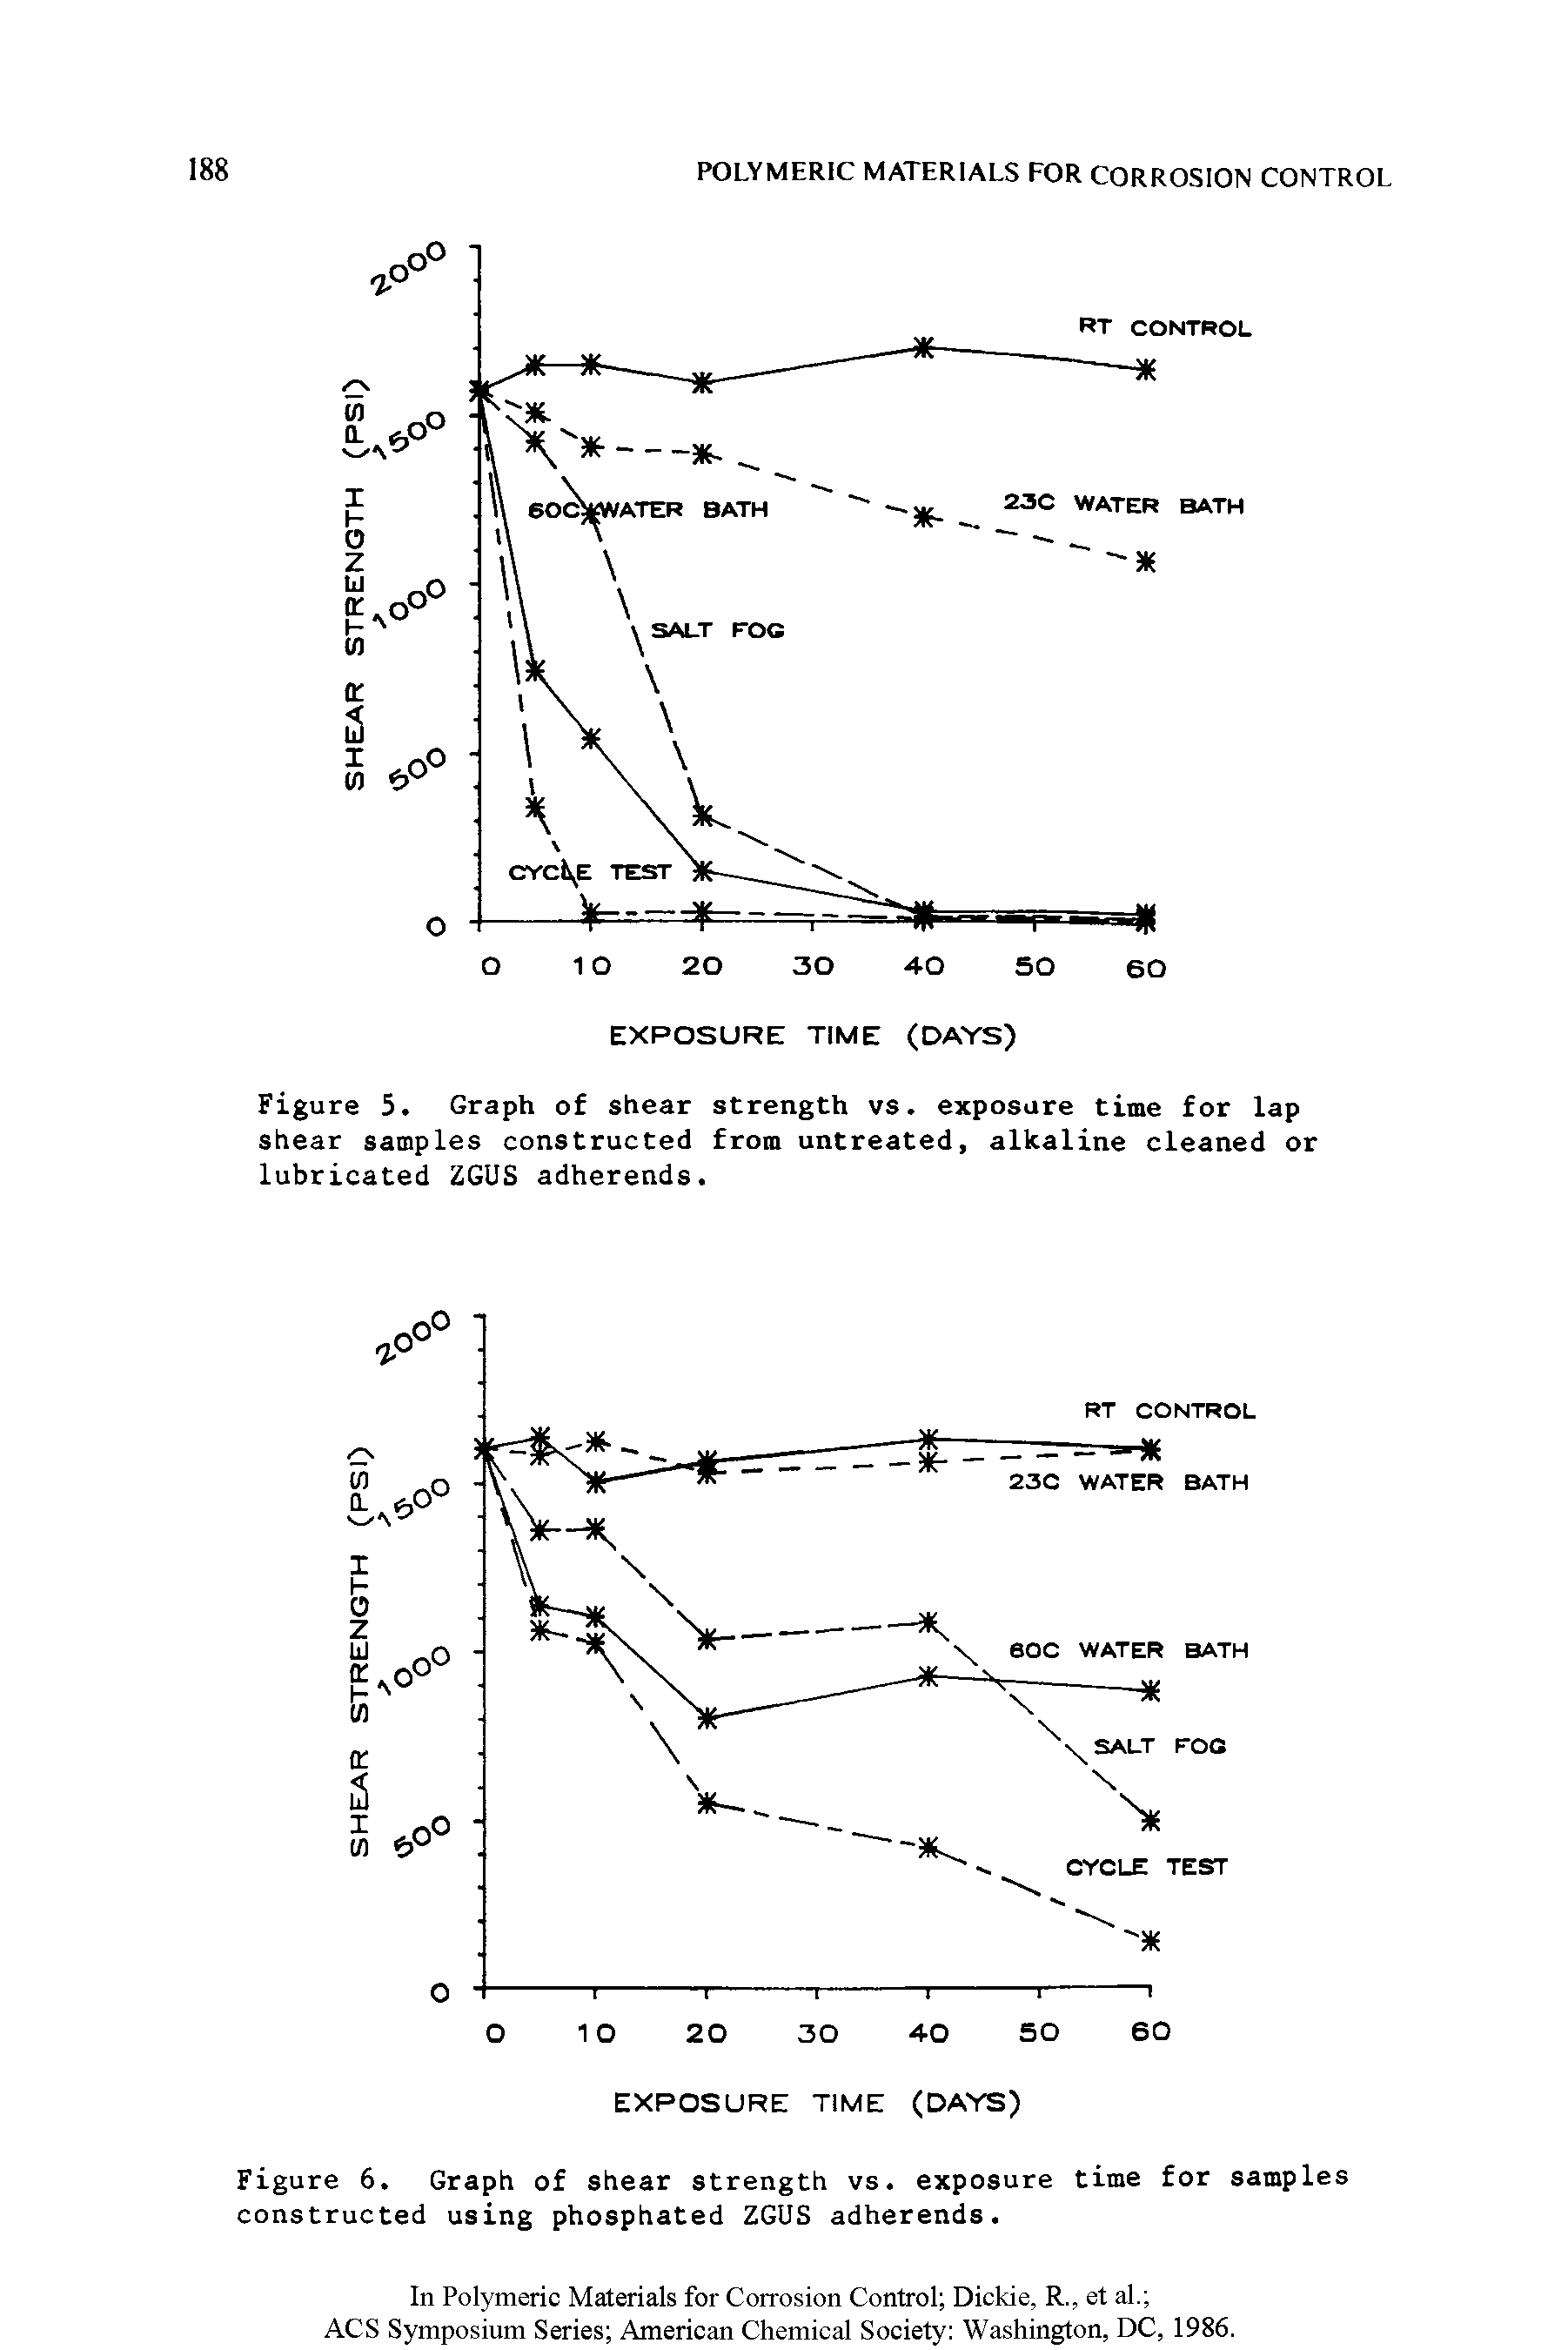 Figure 5. Graph of shear strength vs. exposure time for lap shear samples constructed from untreated, alkaline cleaned or lubricated ZGUS adherends.